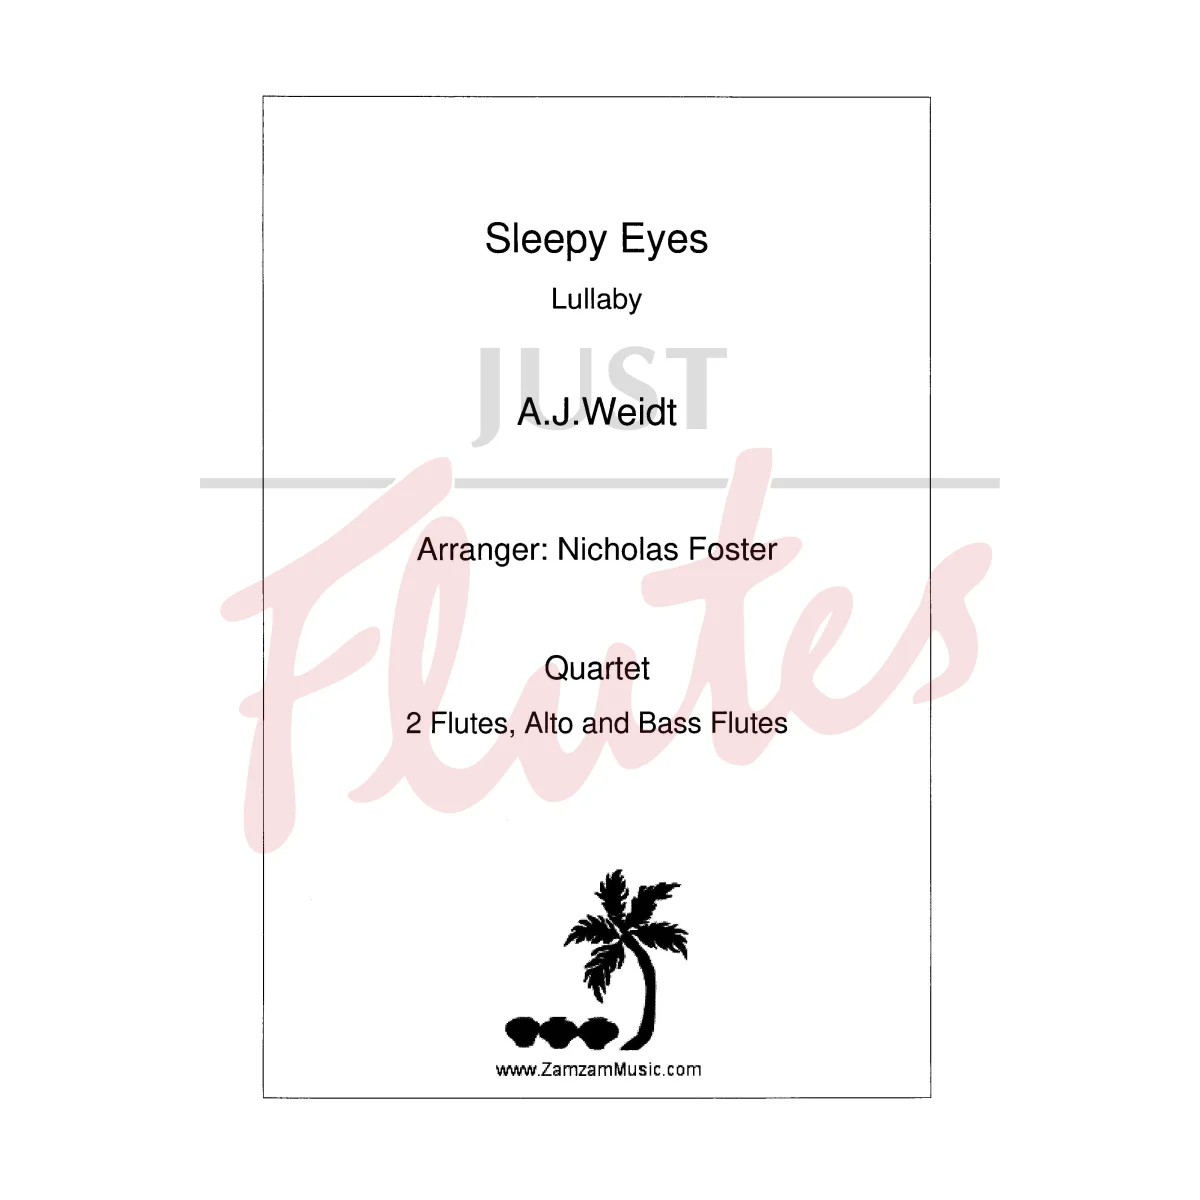 Sleepy Eyes: Lullaby for Two Flutes, Alto Flute and Bass Flute